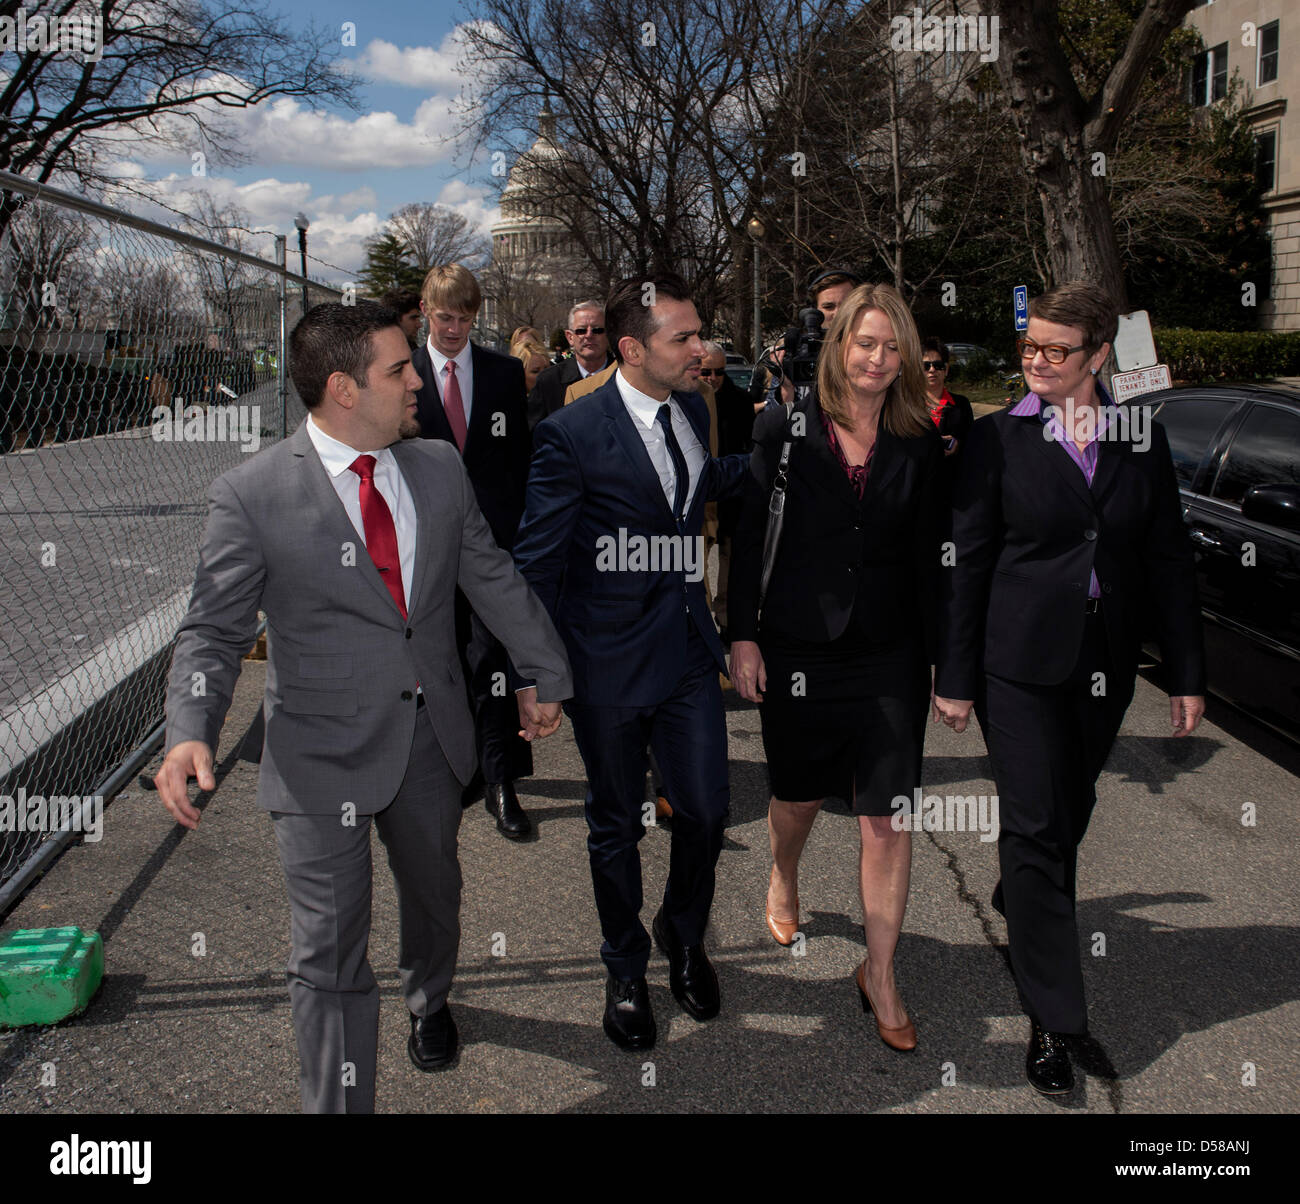 March 26, 2013 - Washington, District of Columbia, U.S. - Prop 8 plaintiffs (from left) JEFF ZARRILLO, PAUL KATAMI, SANDY STIER and KRIS PERRY leave the U.S. Supreme Court after oral arguments in the landmark Proposition 8 marriage equality case.(Credit Image: © Brian Cahn/ZUMAPRESS.com) Stock Photo